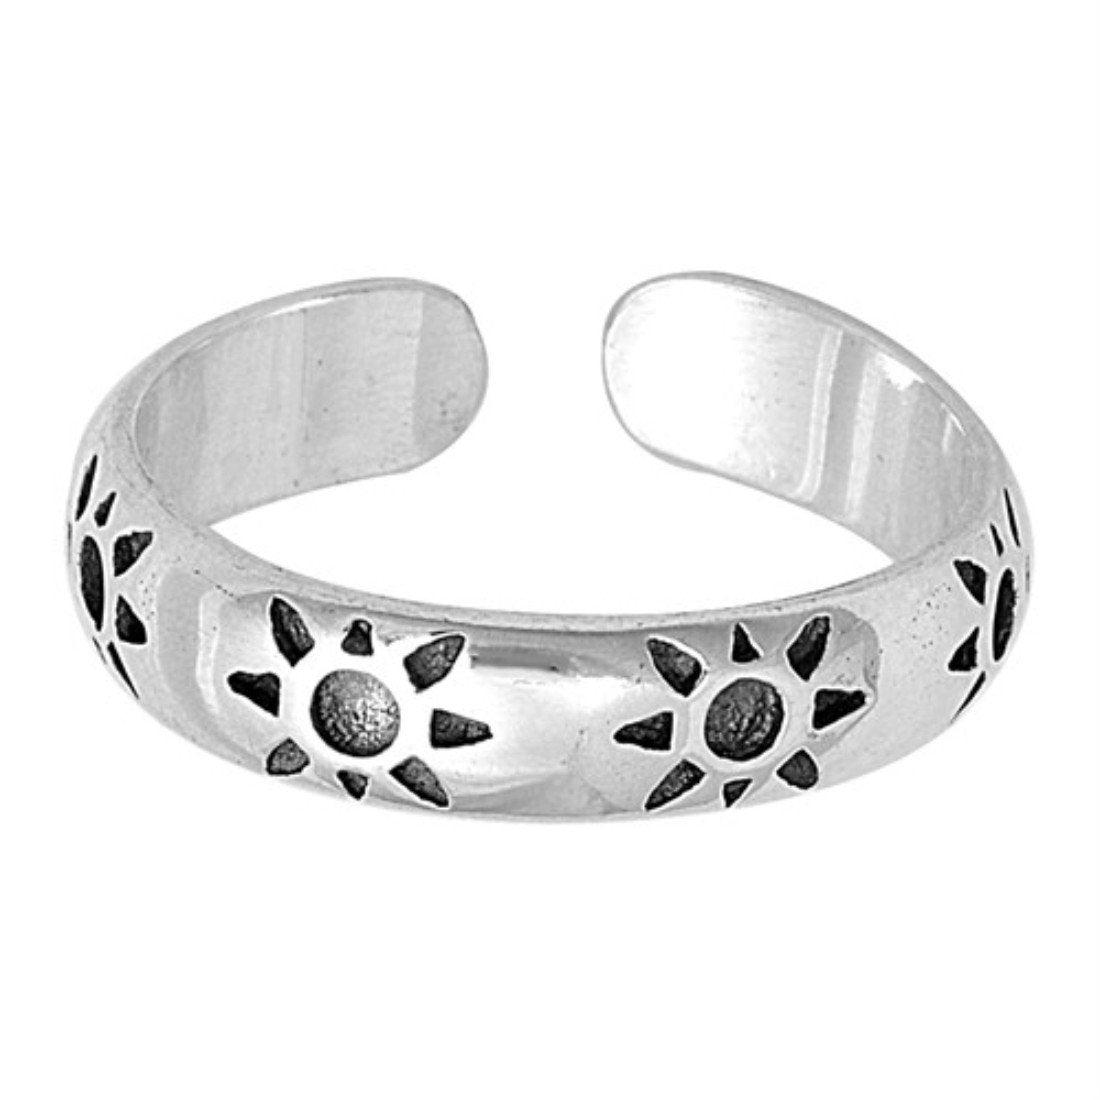 Sun Toe Ring Adjustable Fashion Jewelry 925 Sterling Silver (3mm)